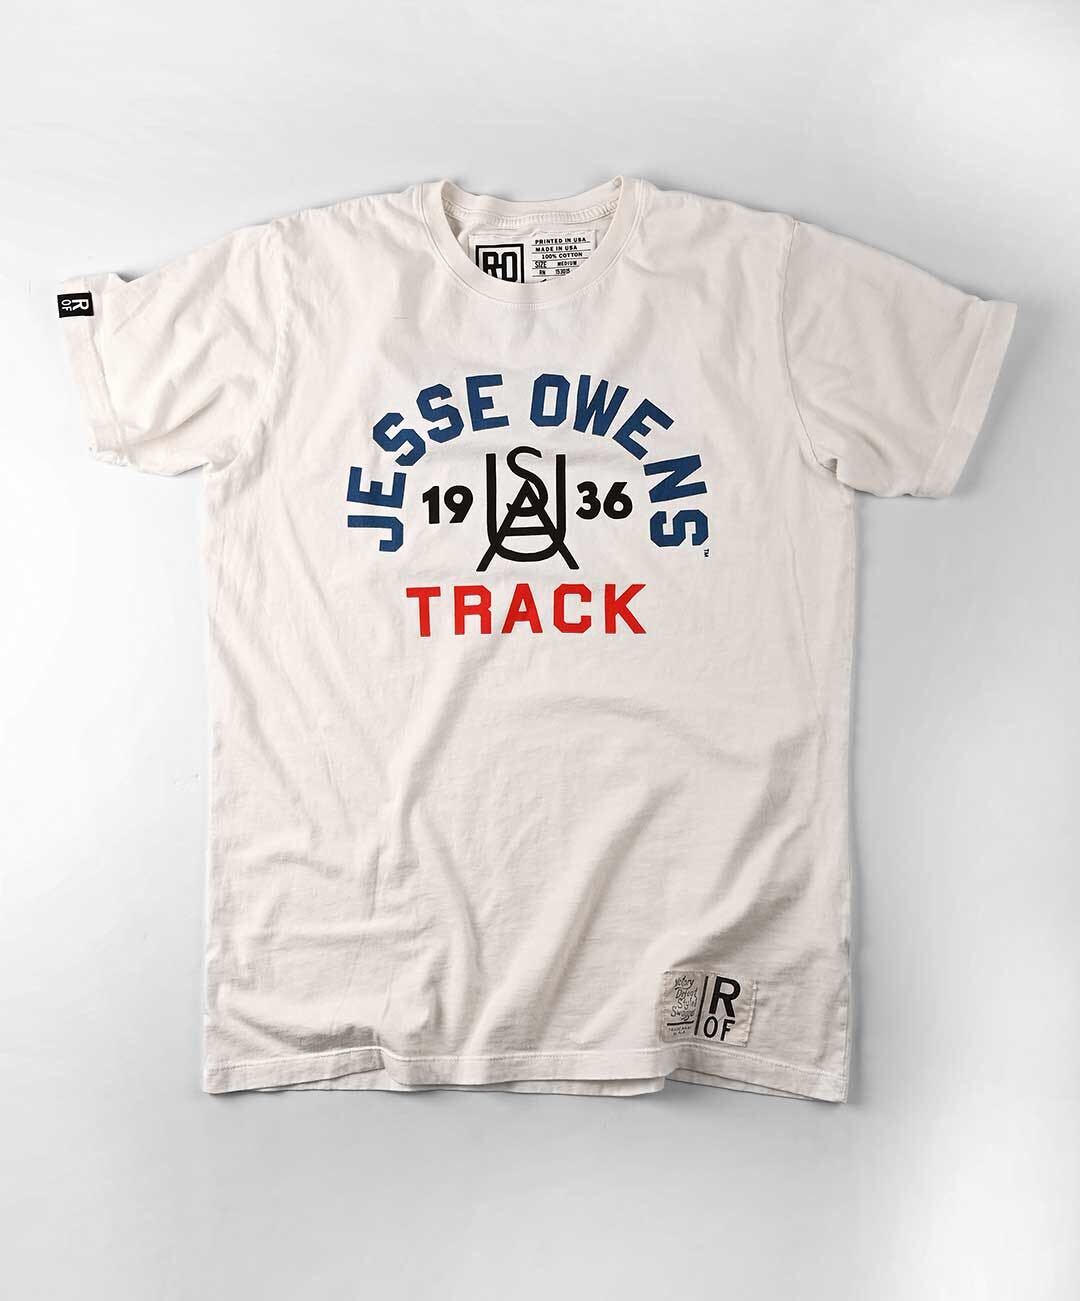 Jesse Owens 1936 Track White Tee - Roots of Fight